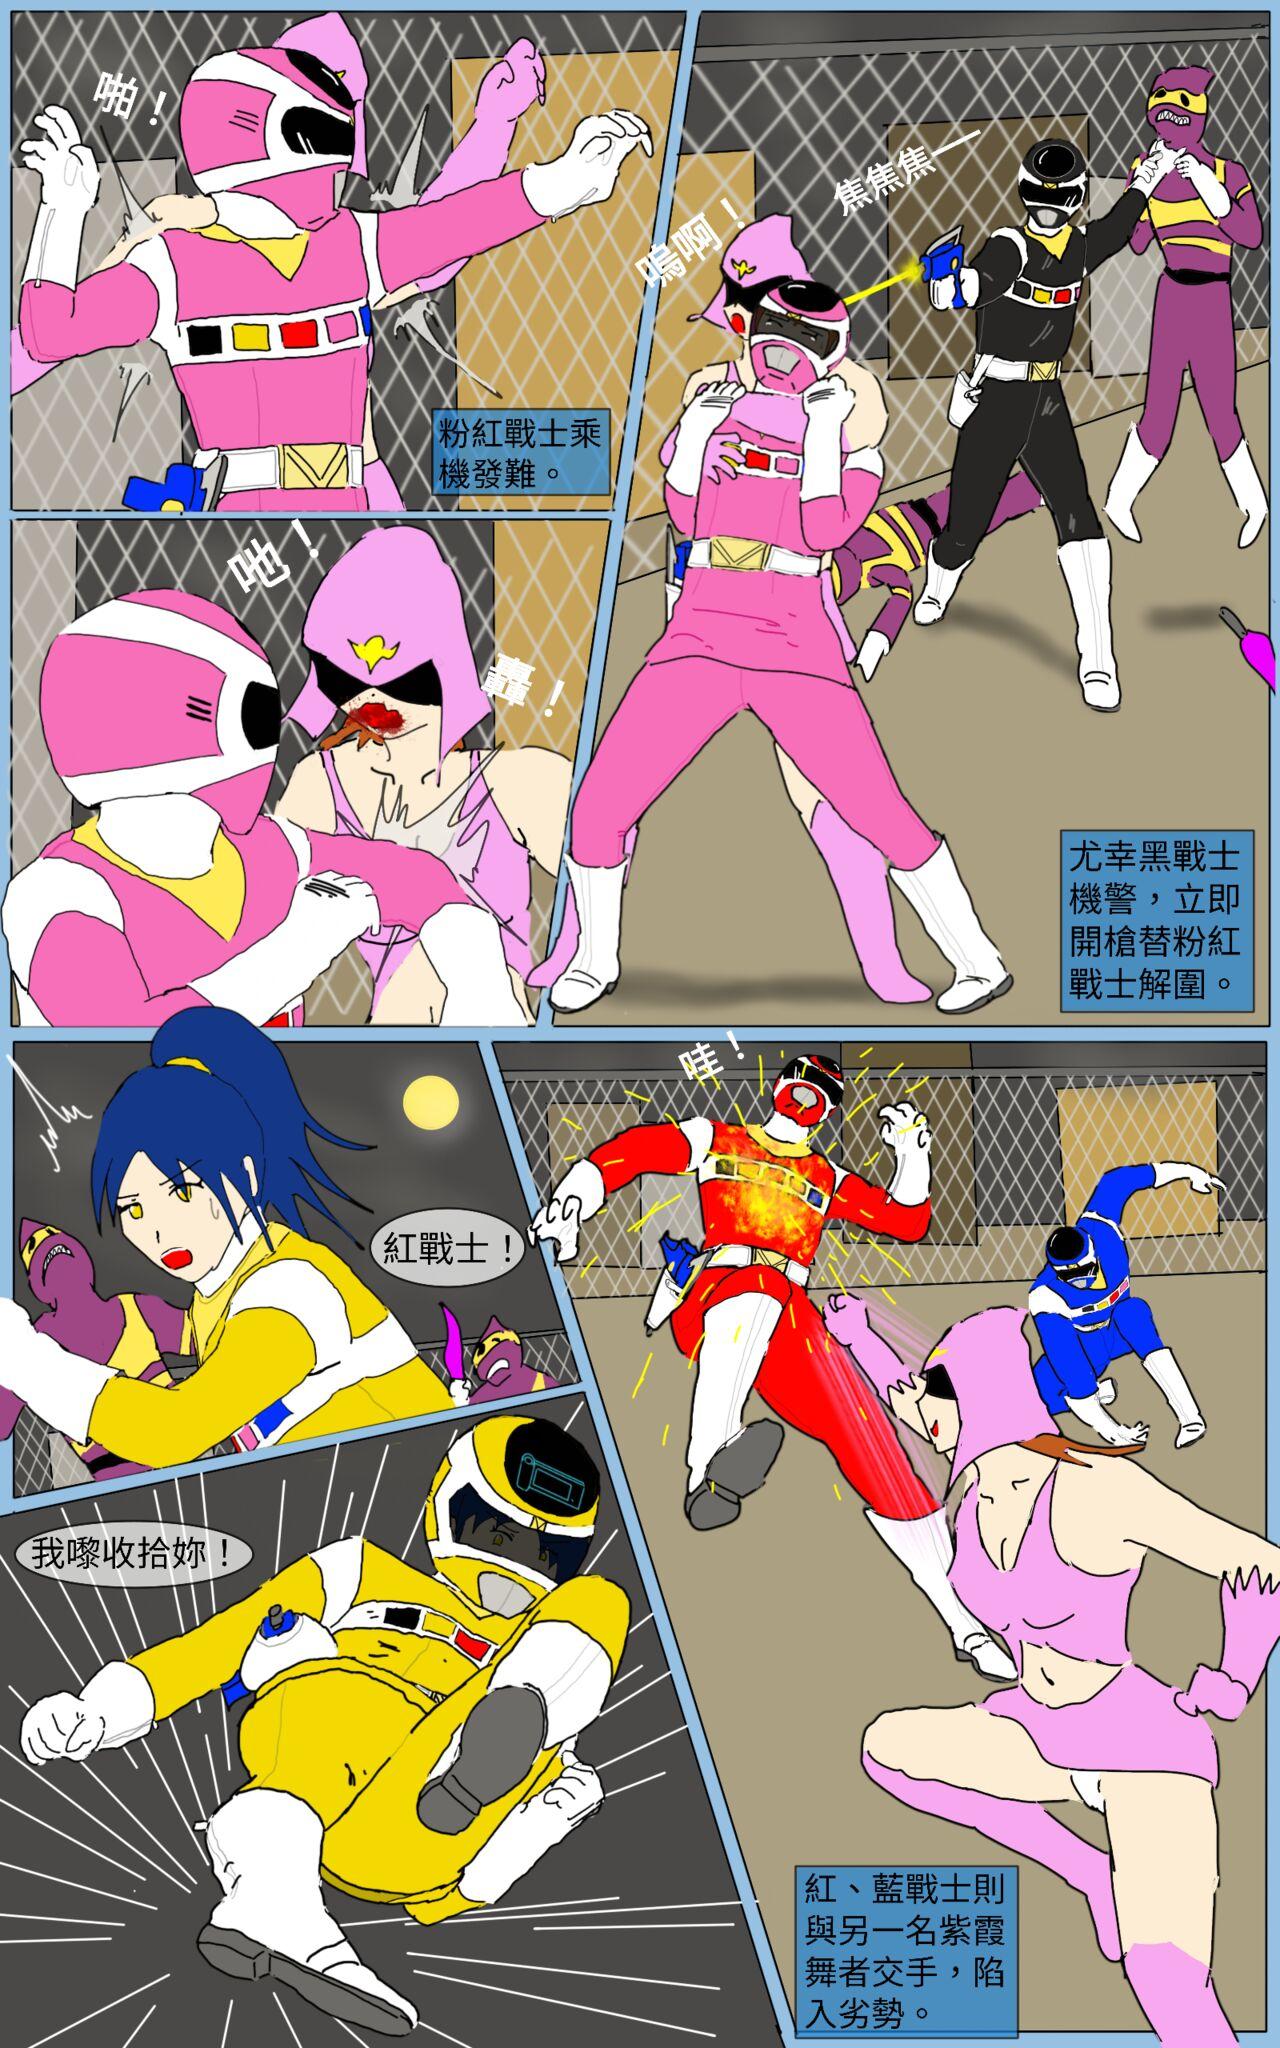 Jerking Off Mission 23 - Super sentai Russian - Page 4